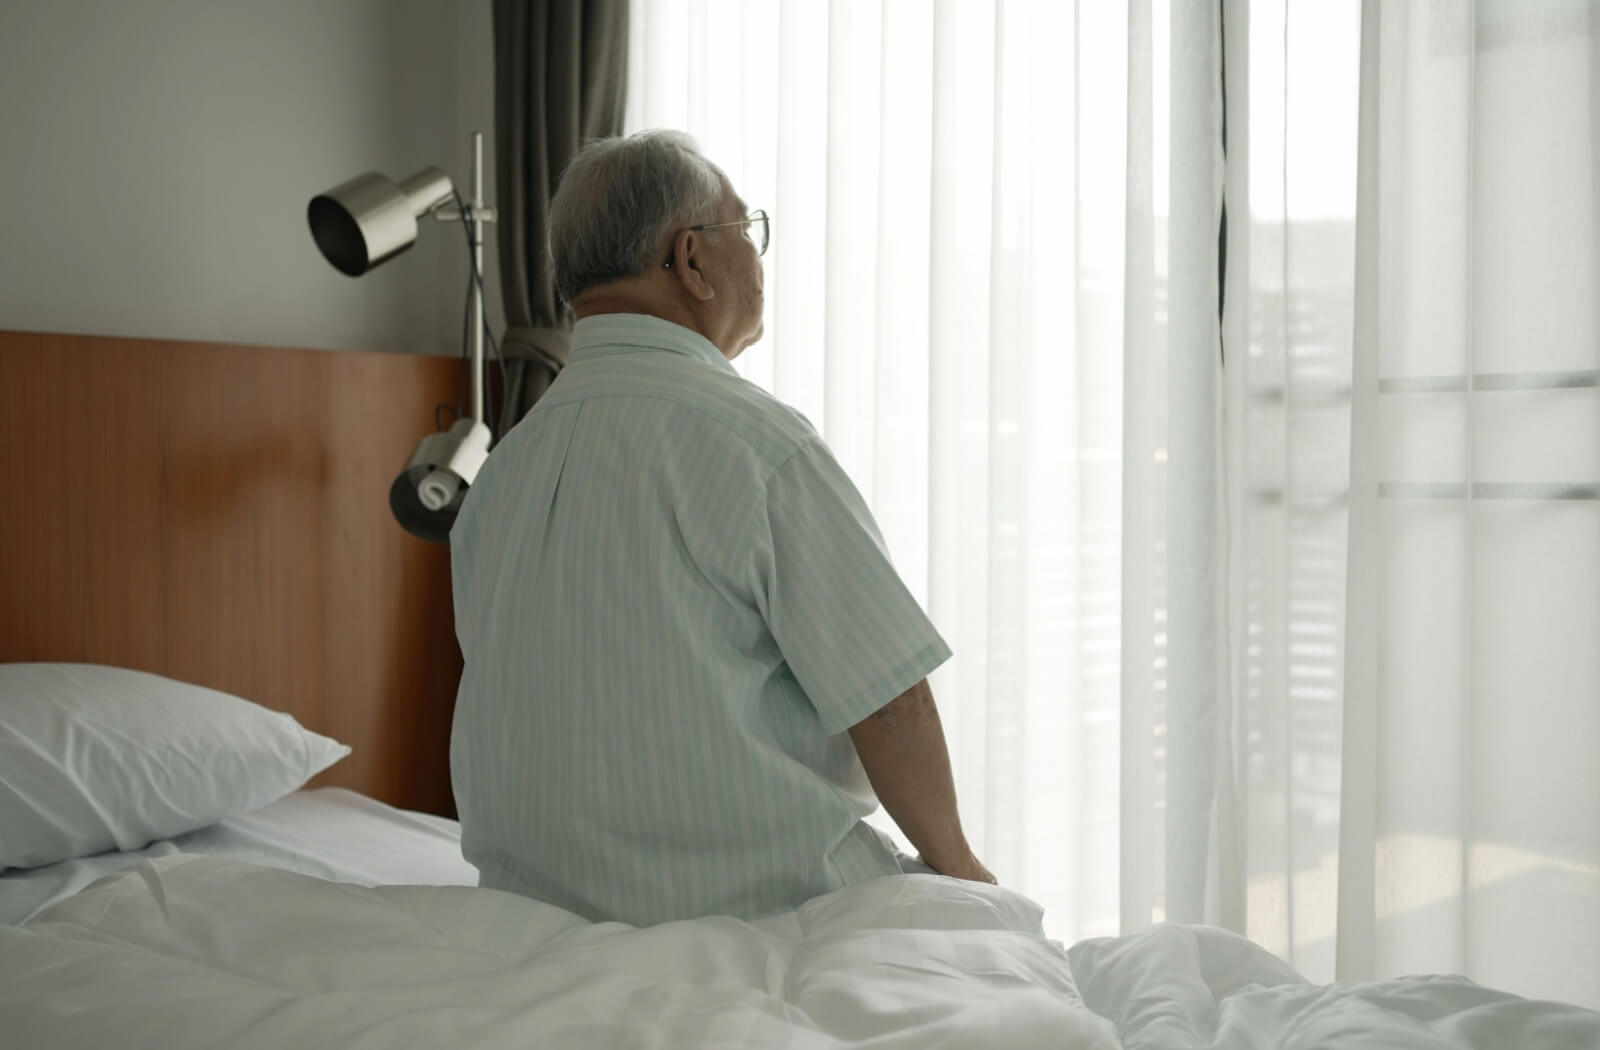 An older adult man sitting alone in his bedroom while  he is spacing out.